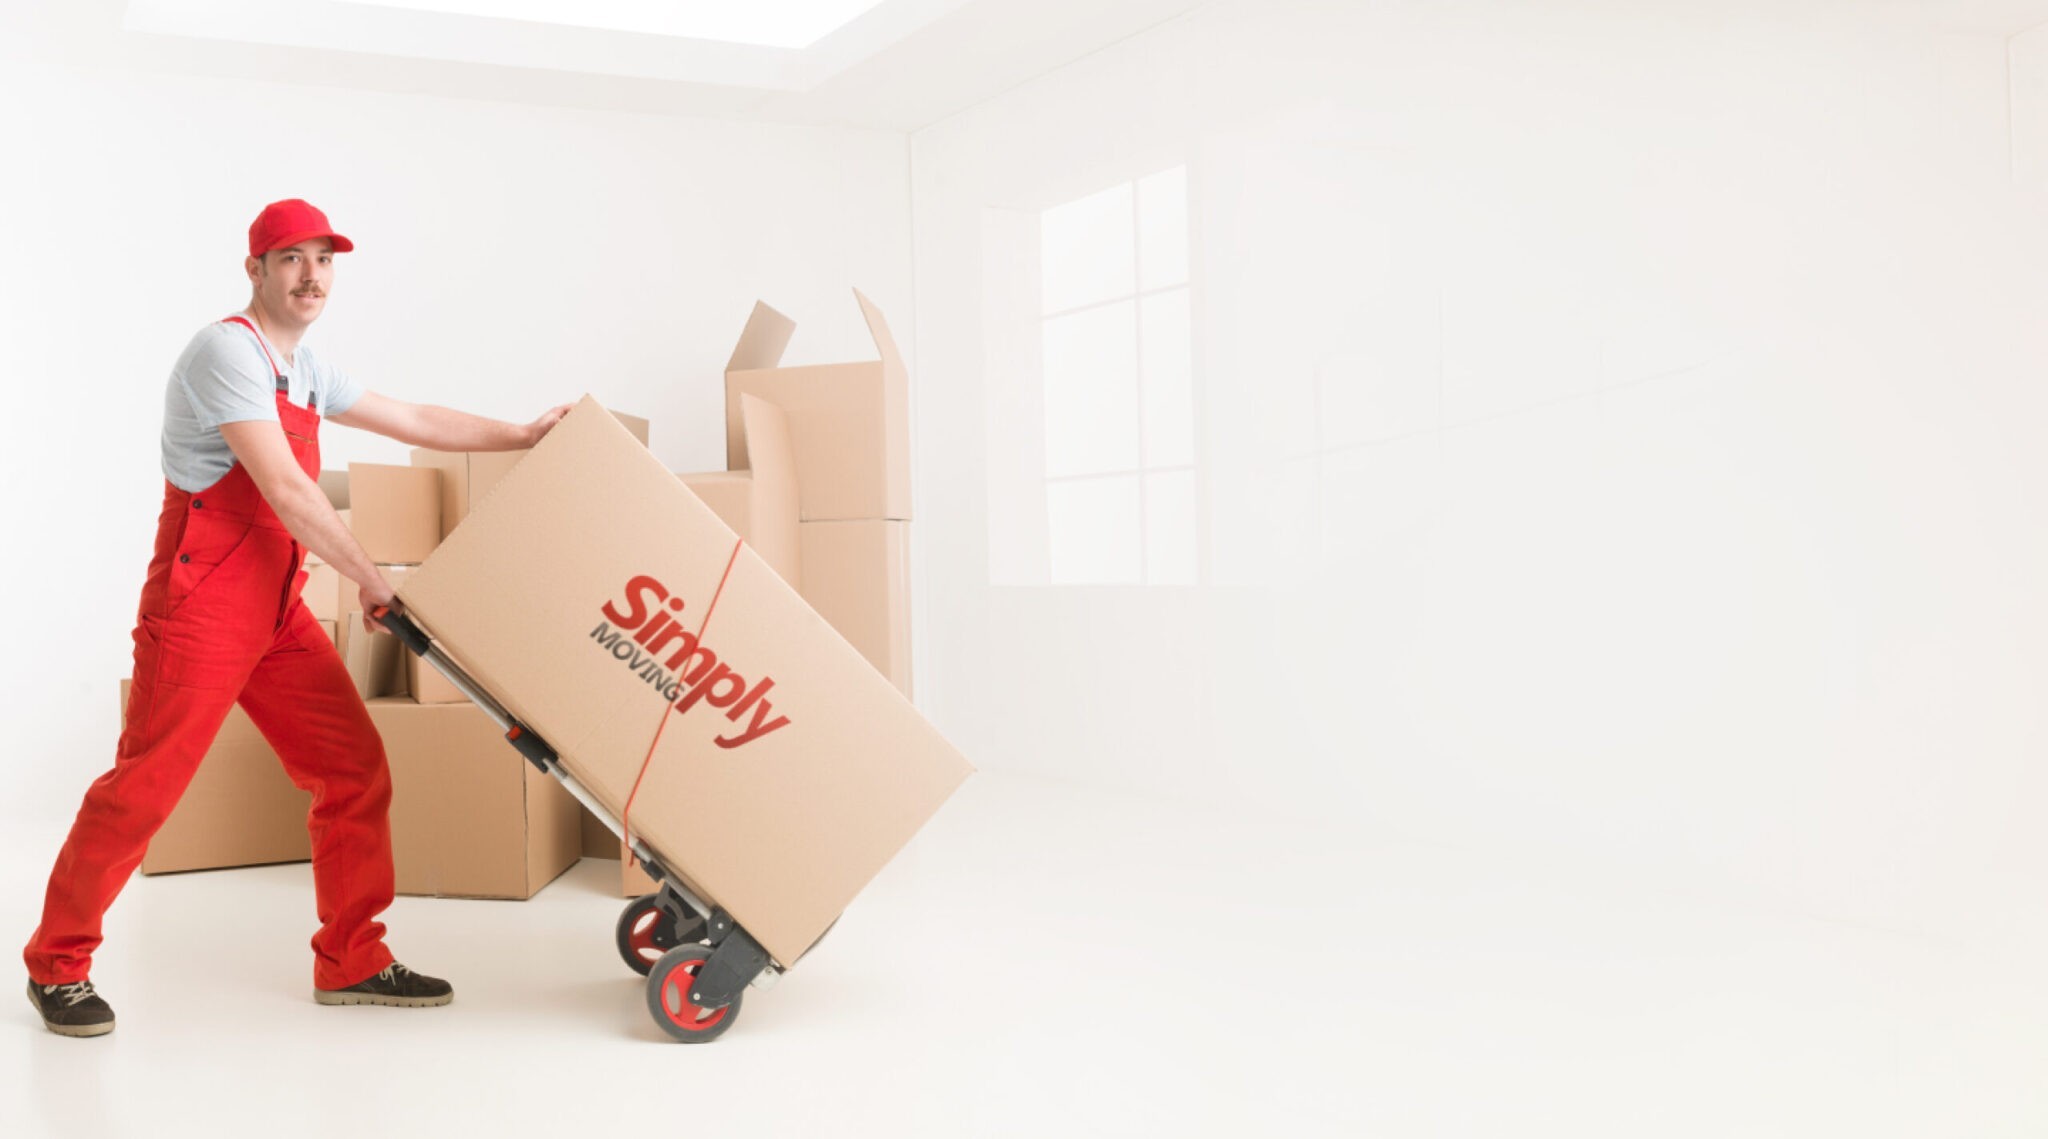 Simply Moving NYC – Simplify your moving day with NYC’s 5 star mover